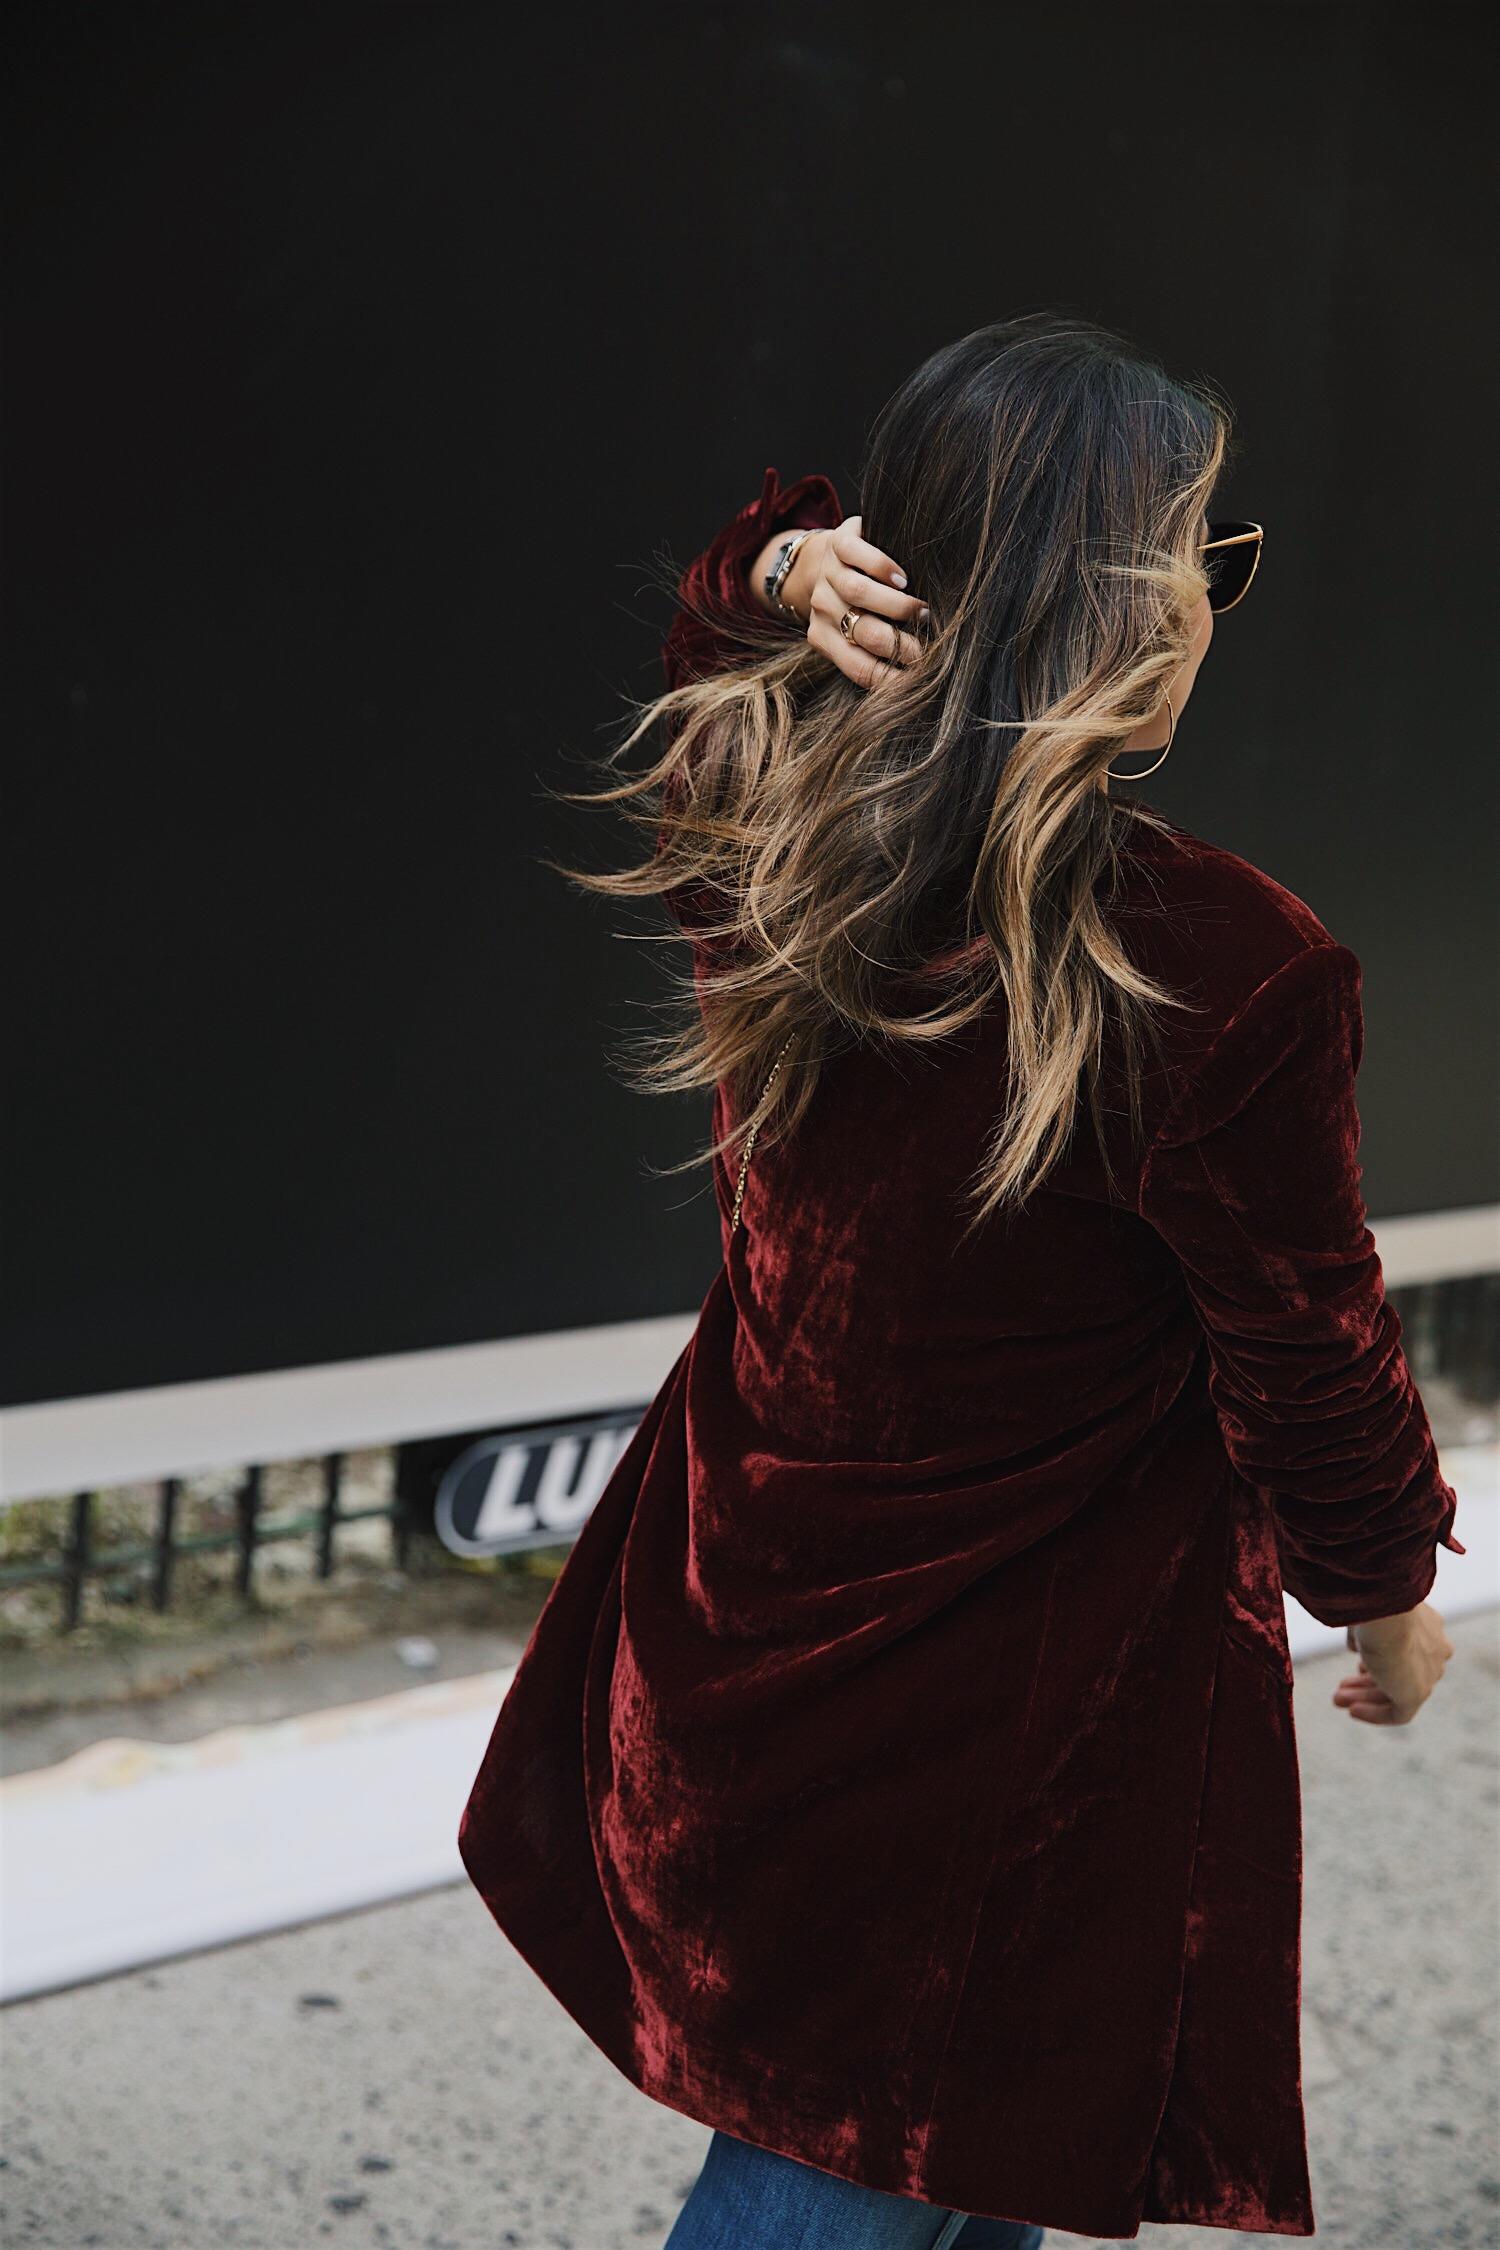 How to Style Velvet | The Girl From Panama